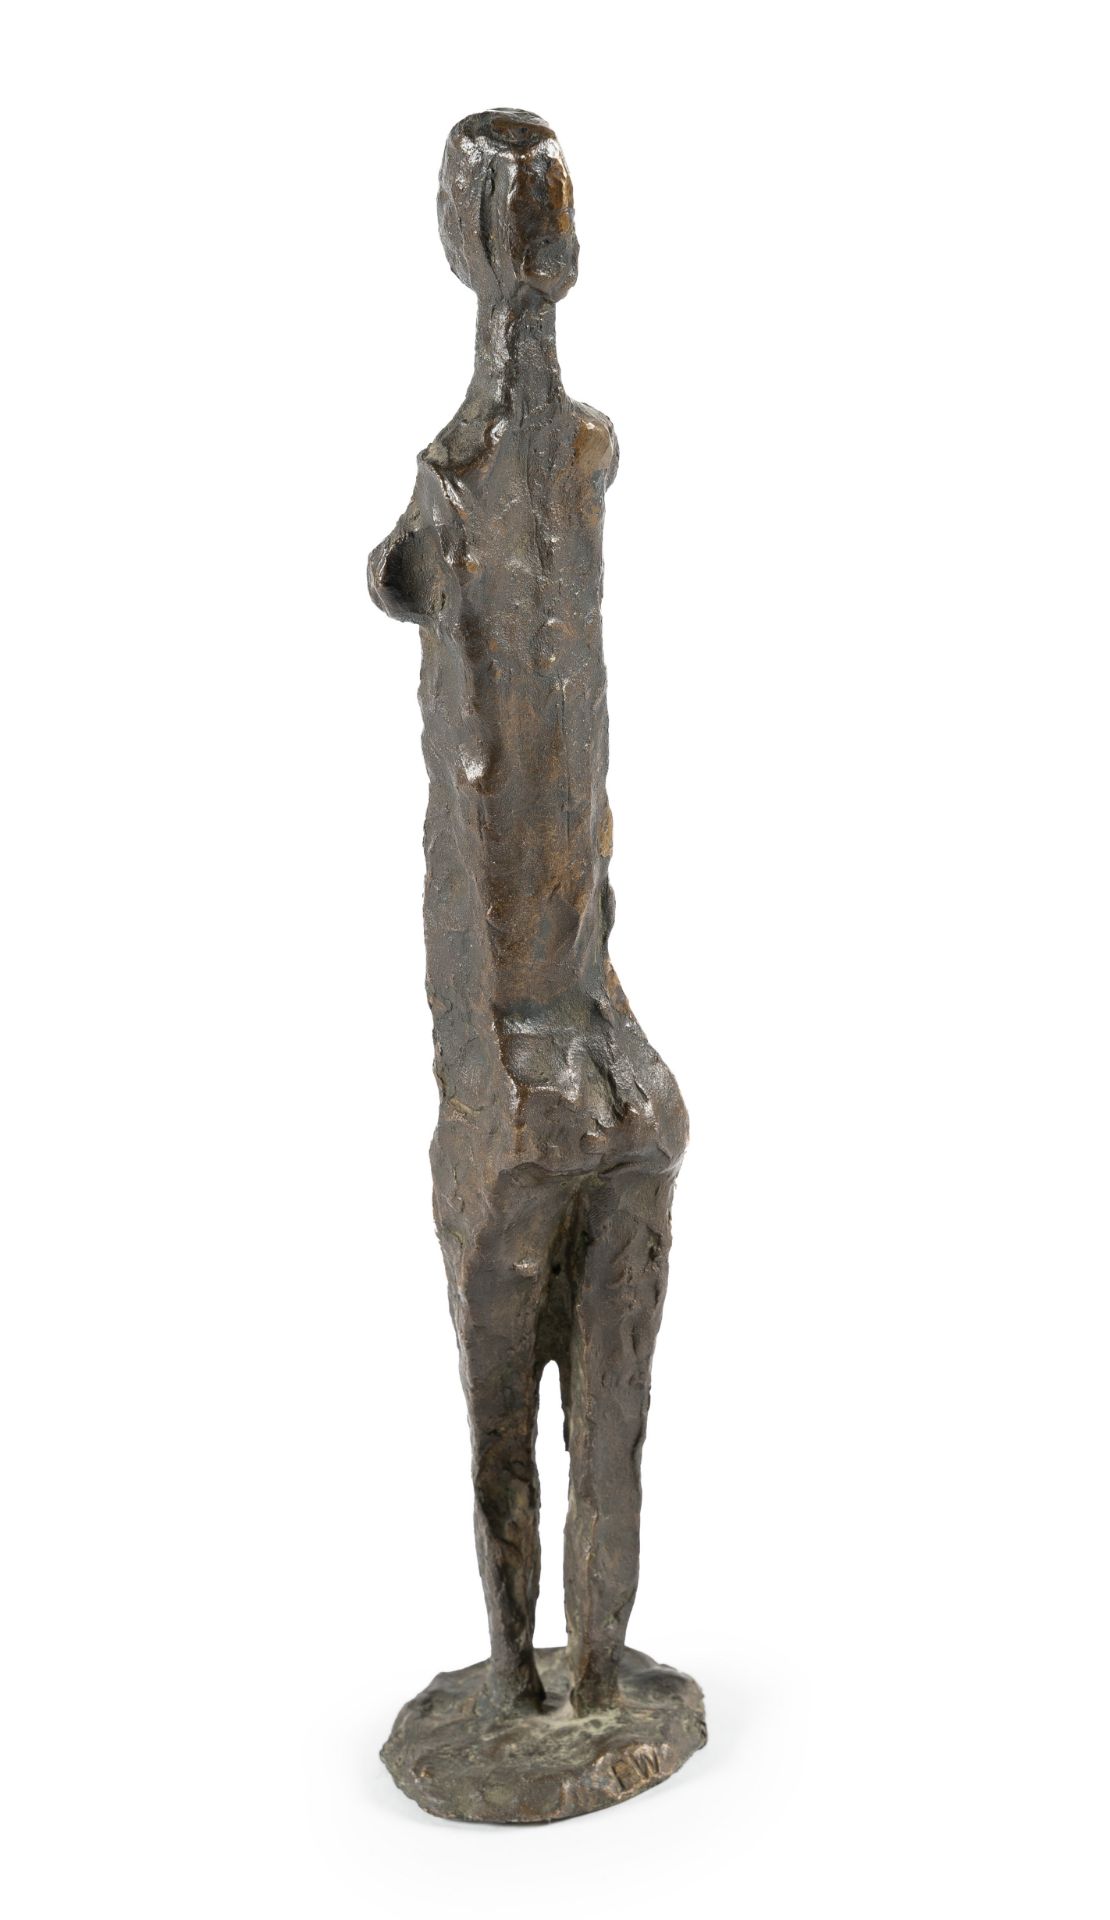 Fritz Wotruba (1907 - Wien - 1975), Small Standing FigureBronze with brown patina. (1948). Ca. 36. - Image 3 of 4